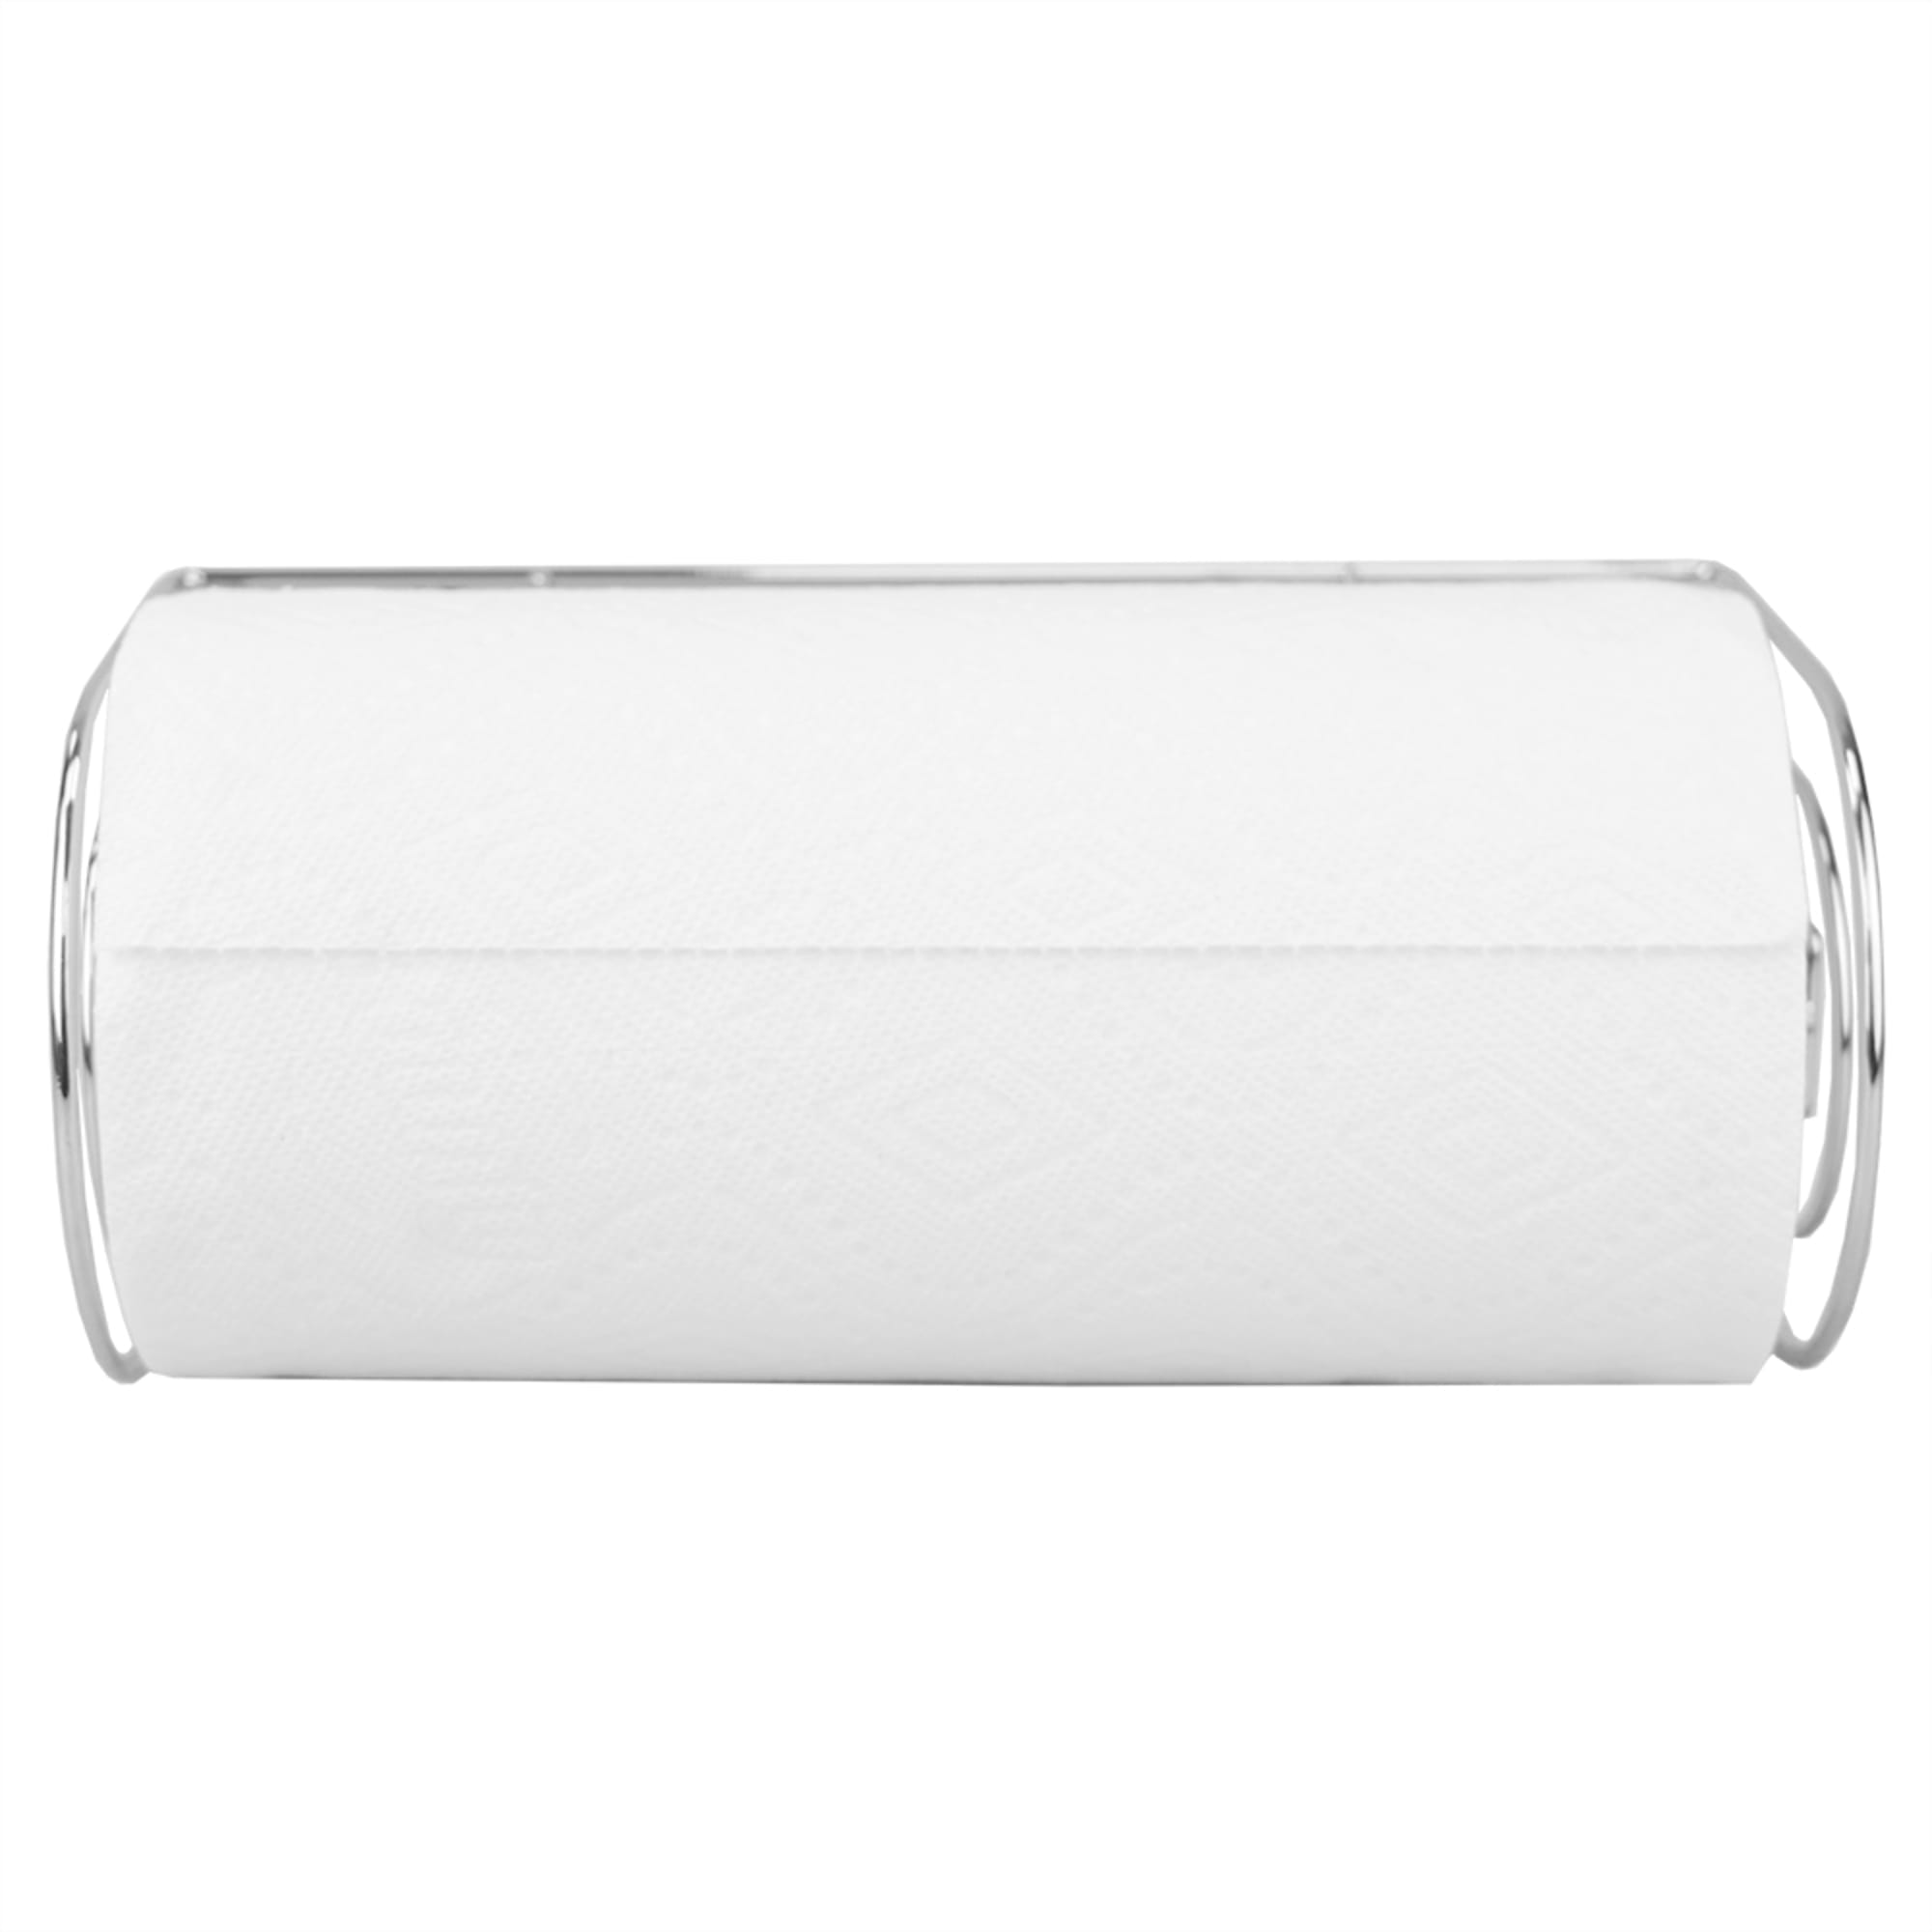 Home Basics Pave Wall Mounted Steel Paper Towel Holder, Chrome $8.00 EACH, CASE PACK OF 12